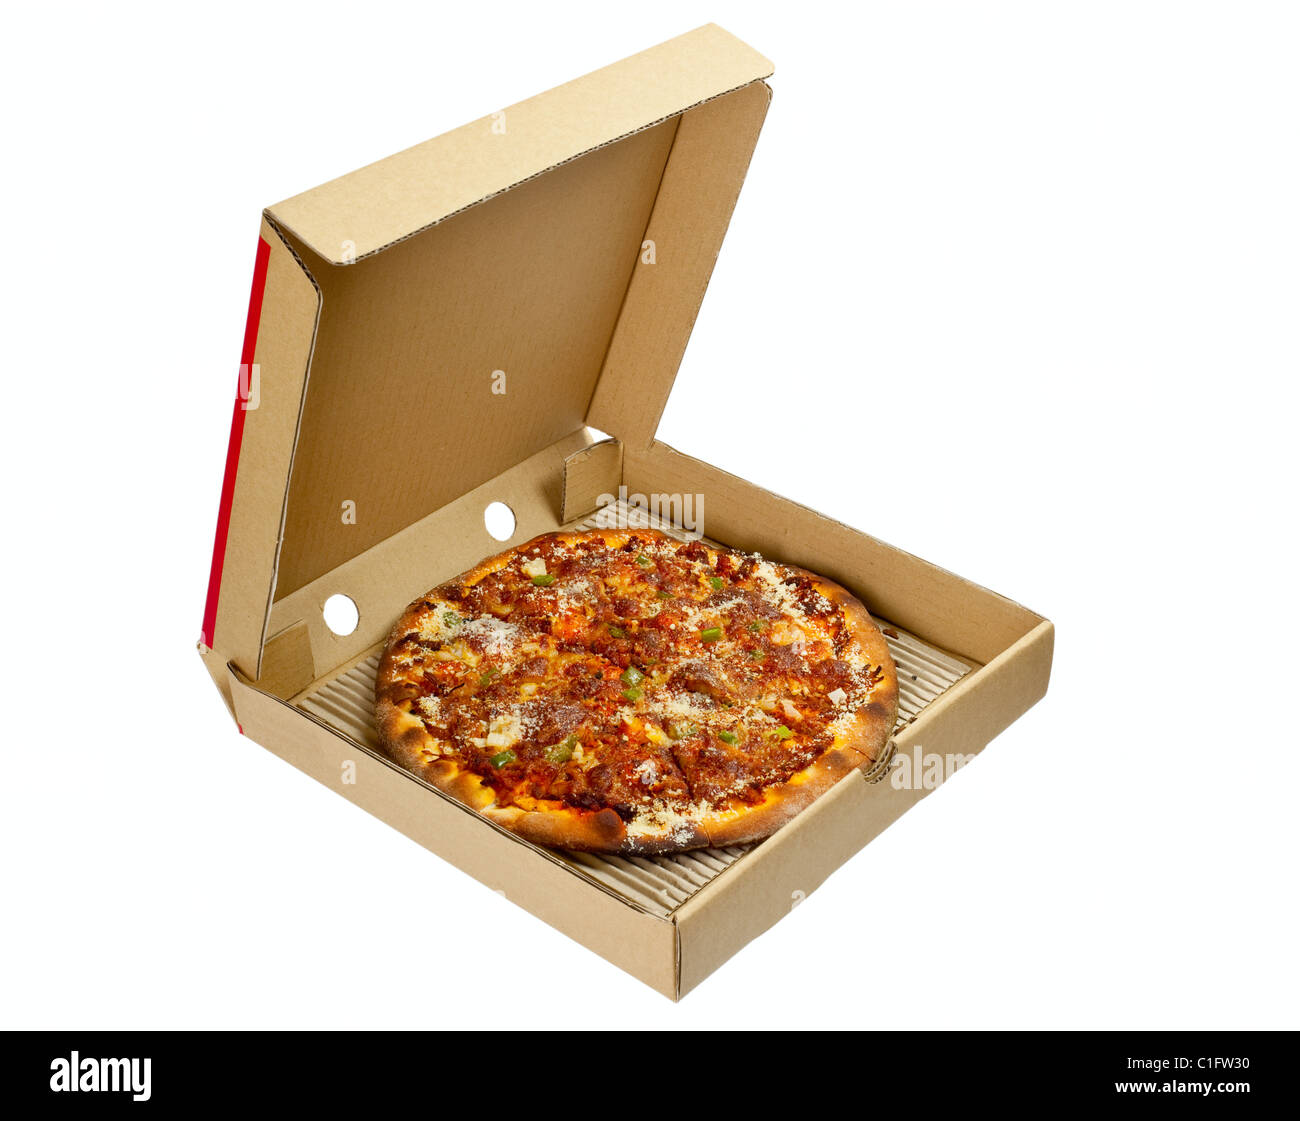 Pizza in a takeaway box isolated on white background Stock Photo